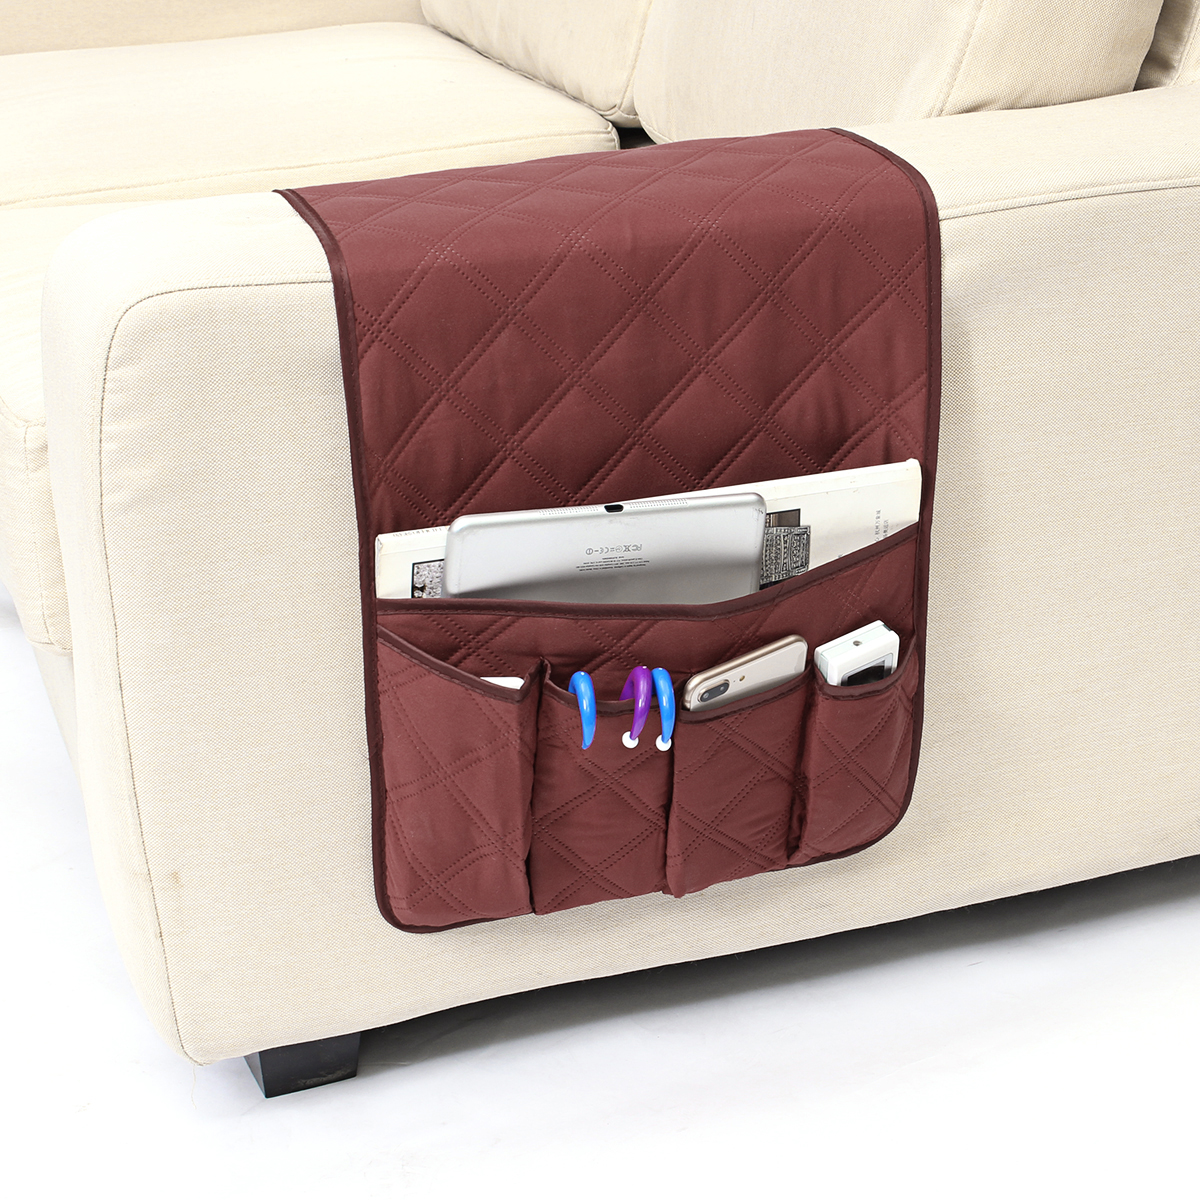 Waterproof-5-Pocket-Armchair-Sofa-Chair-Storage-Bag-Mobile-Phone-Couch-Organizer-1255483-20